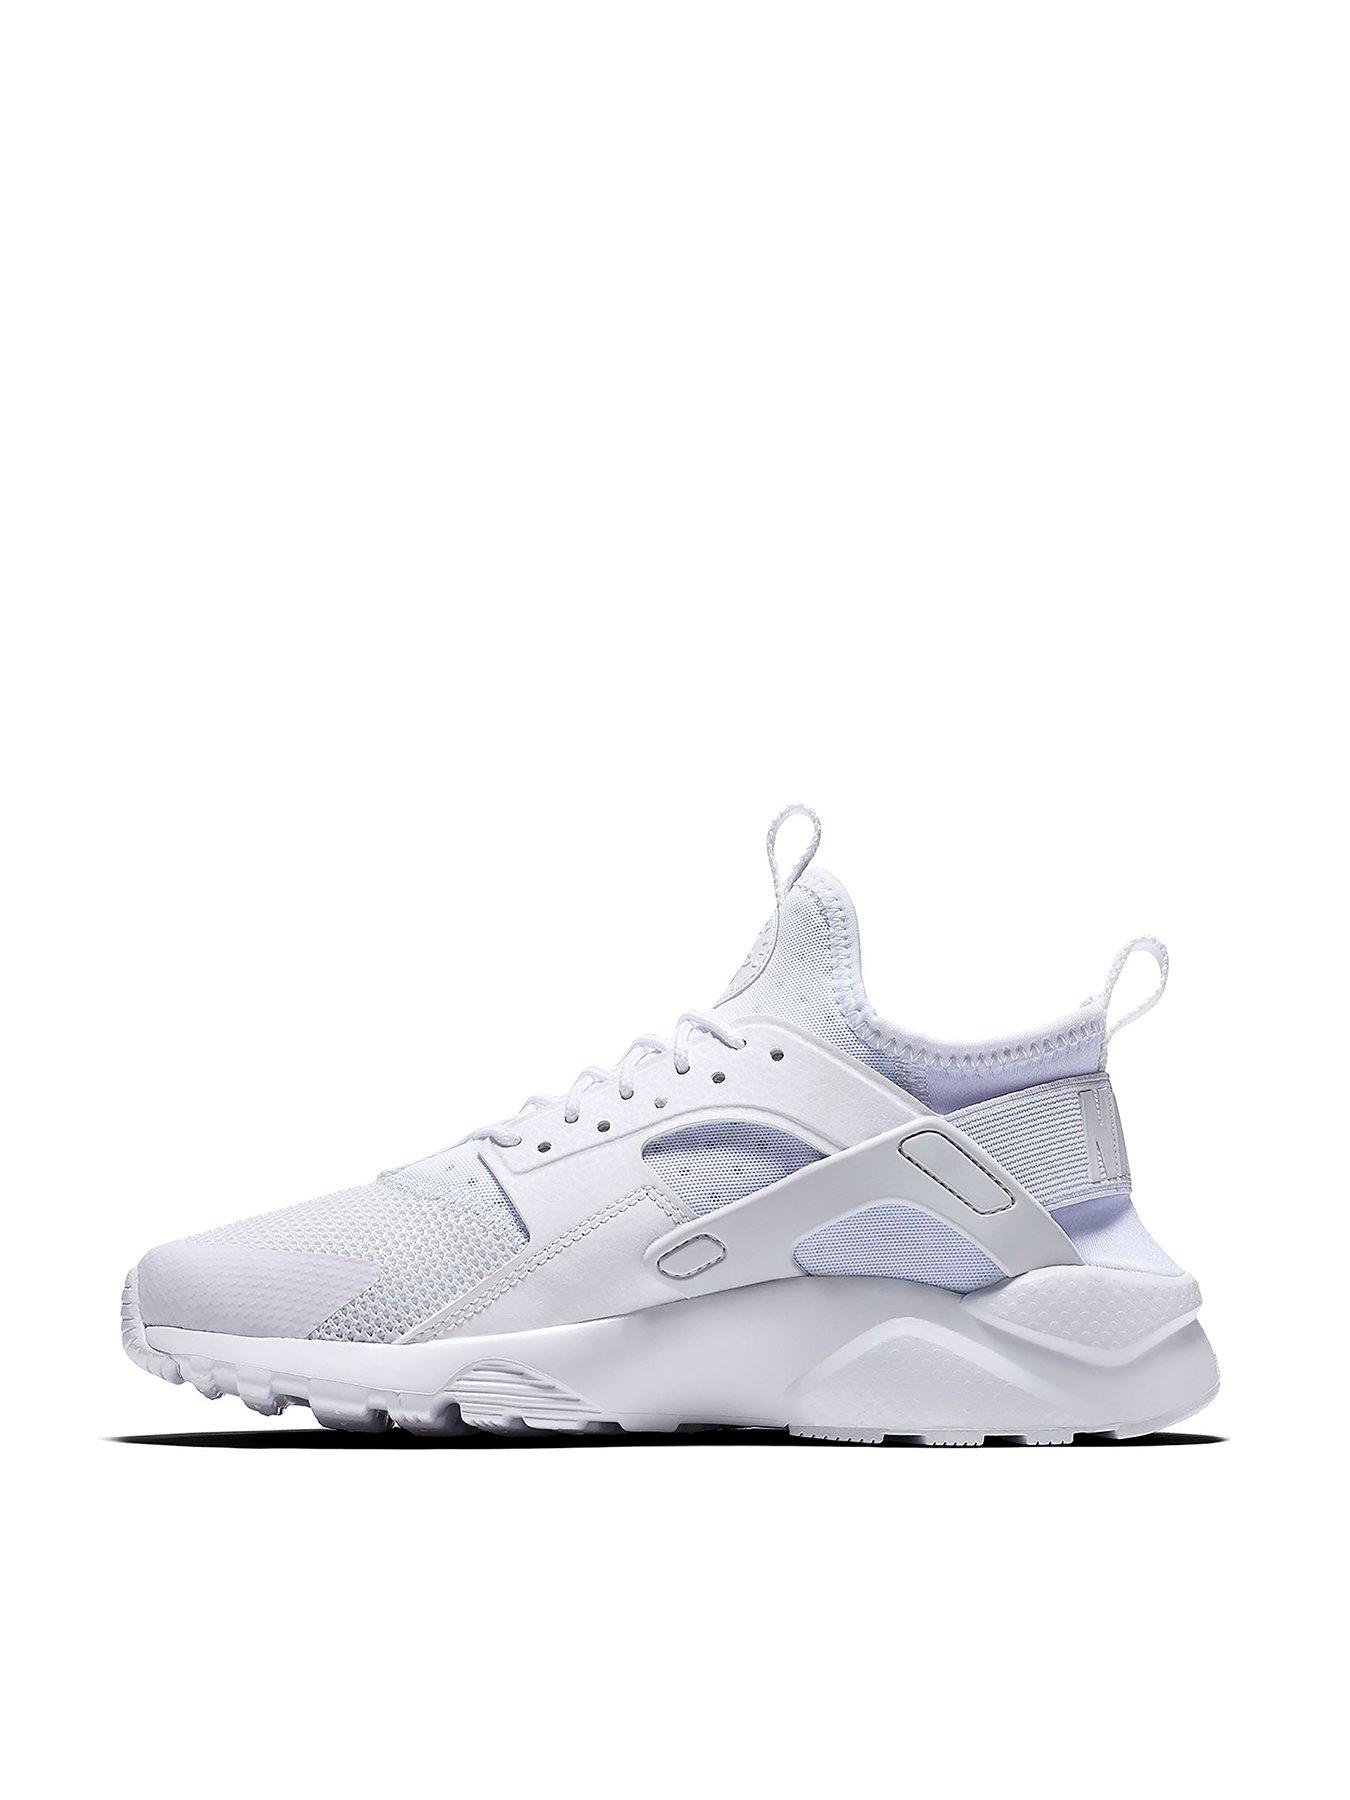 baby huaraches size 3